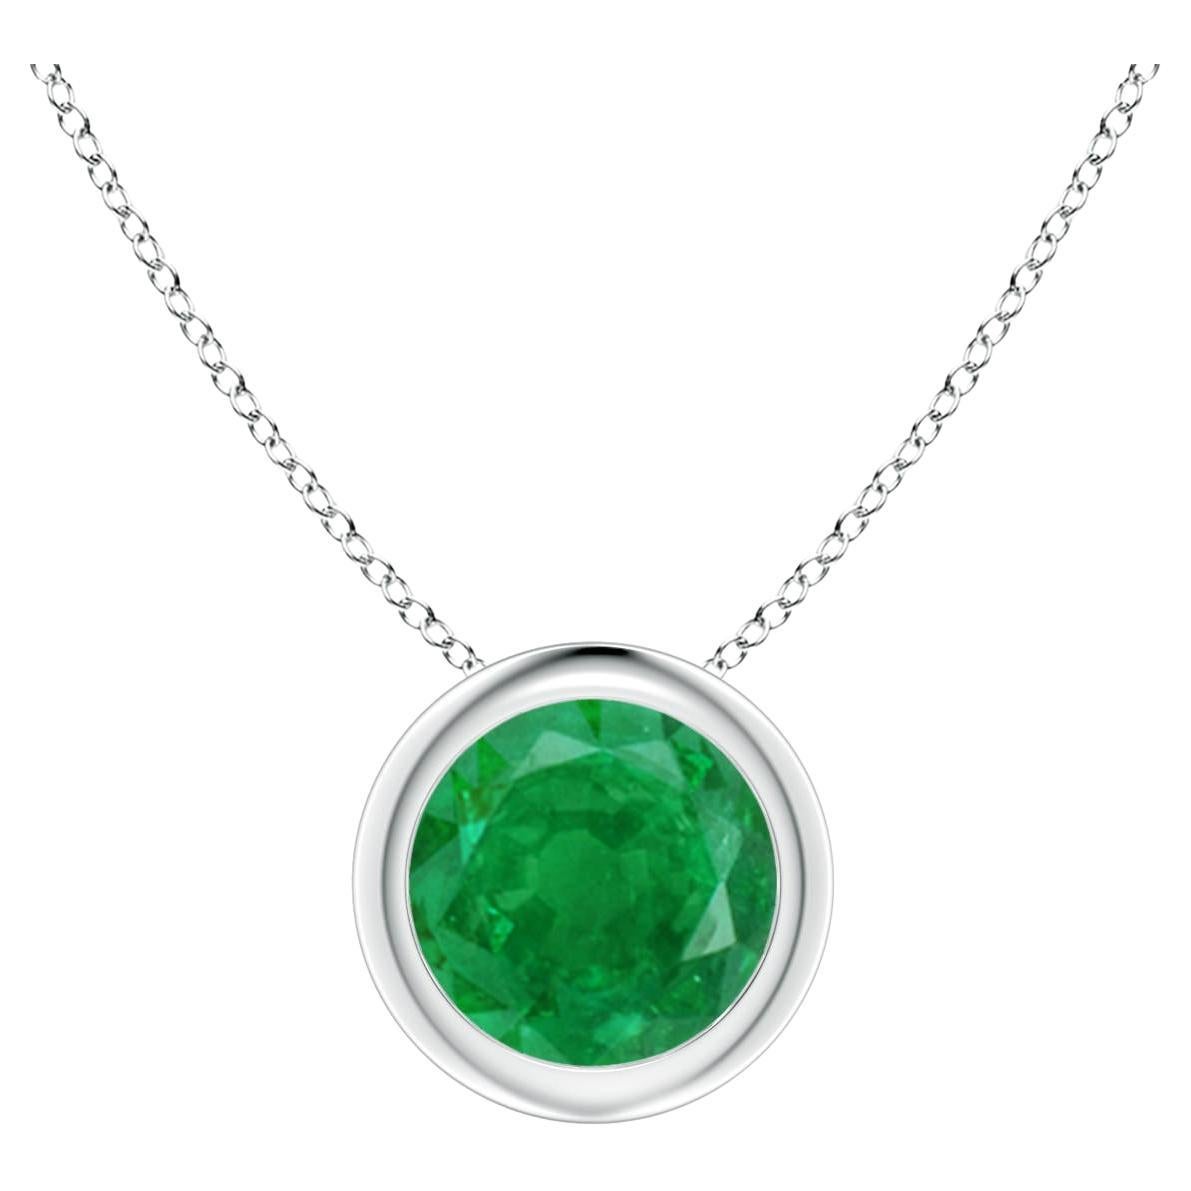 Natural Bezel-Set Round Emerald Solitaire Pendant in 14K White Gold (6mm)